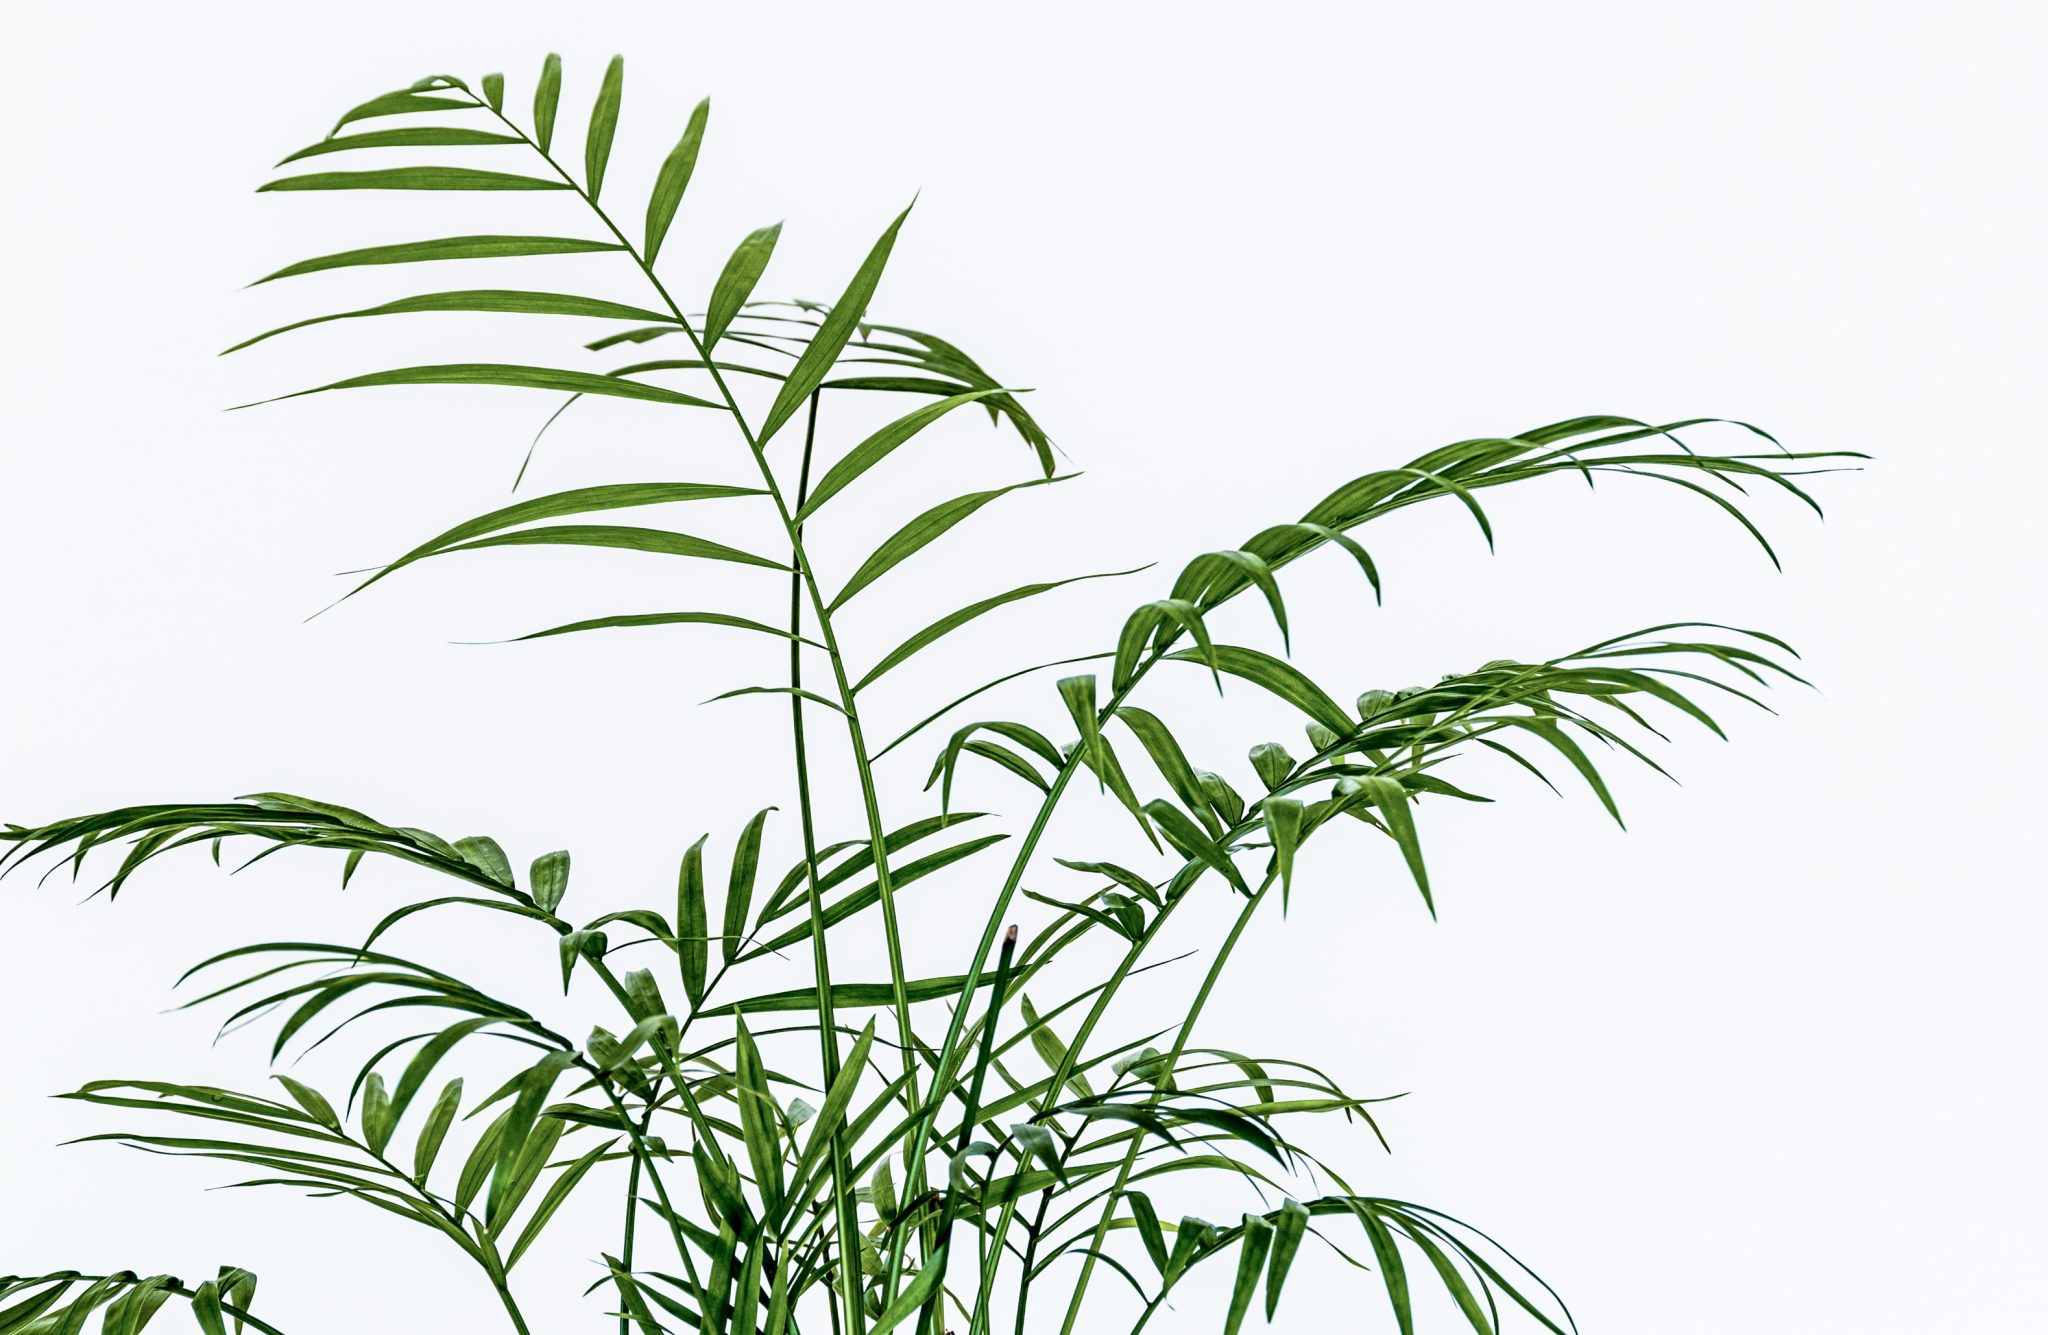 How to Care for and Propagate a Parlor Palm Sprouts and Stems